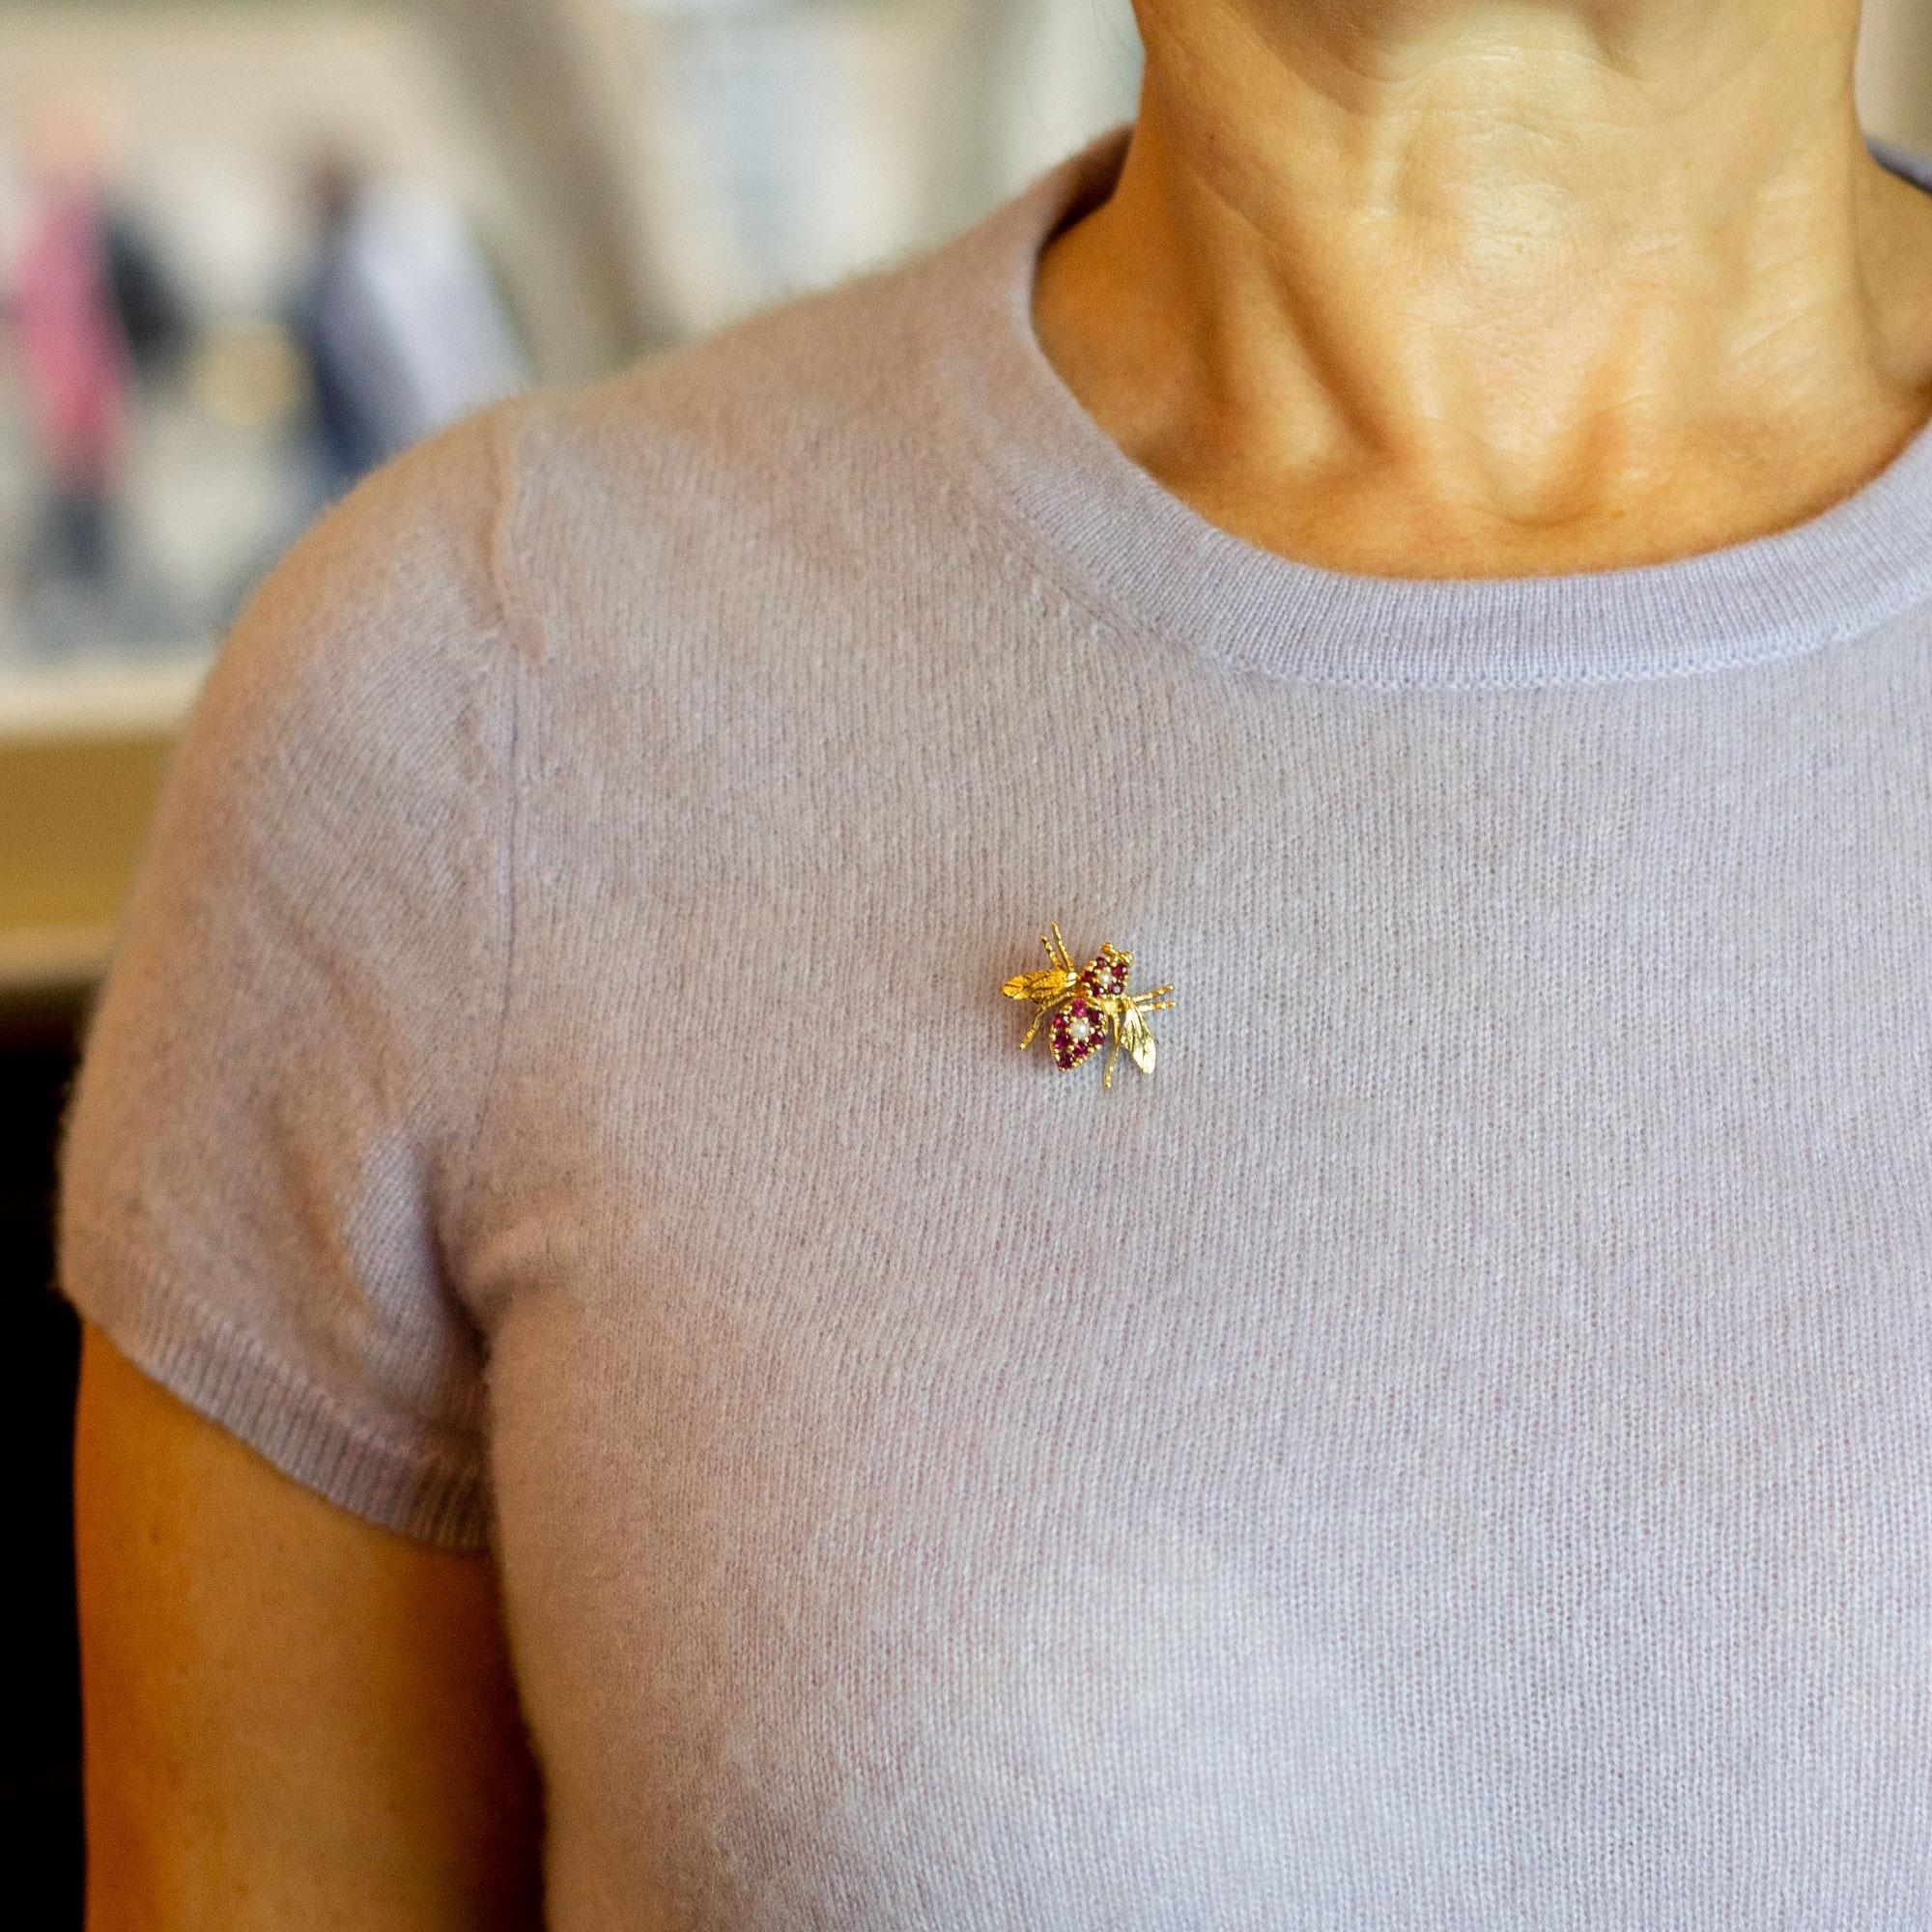 18 Karat Gold Bee Pin with Rubies and Pearls In Excellent Condition In Brisbane City, QLD